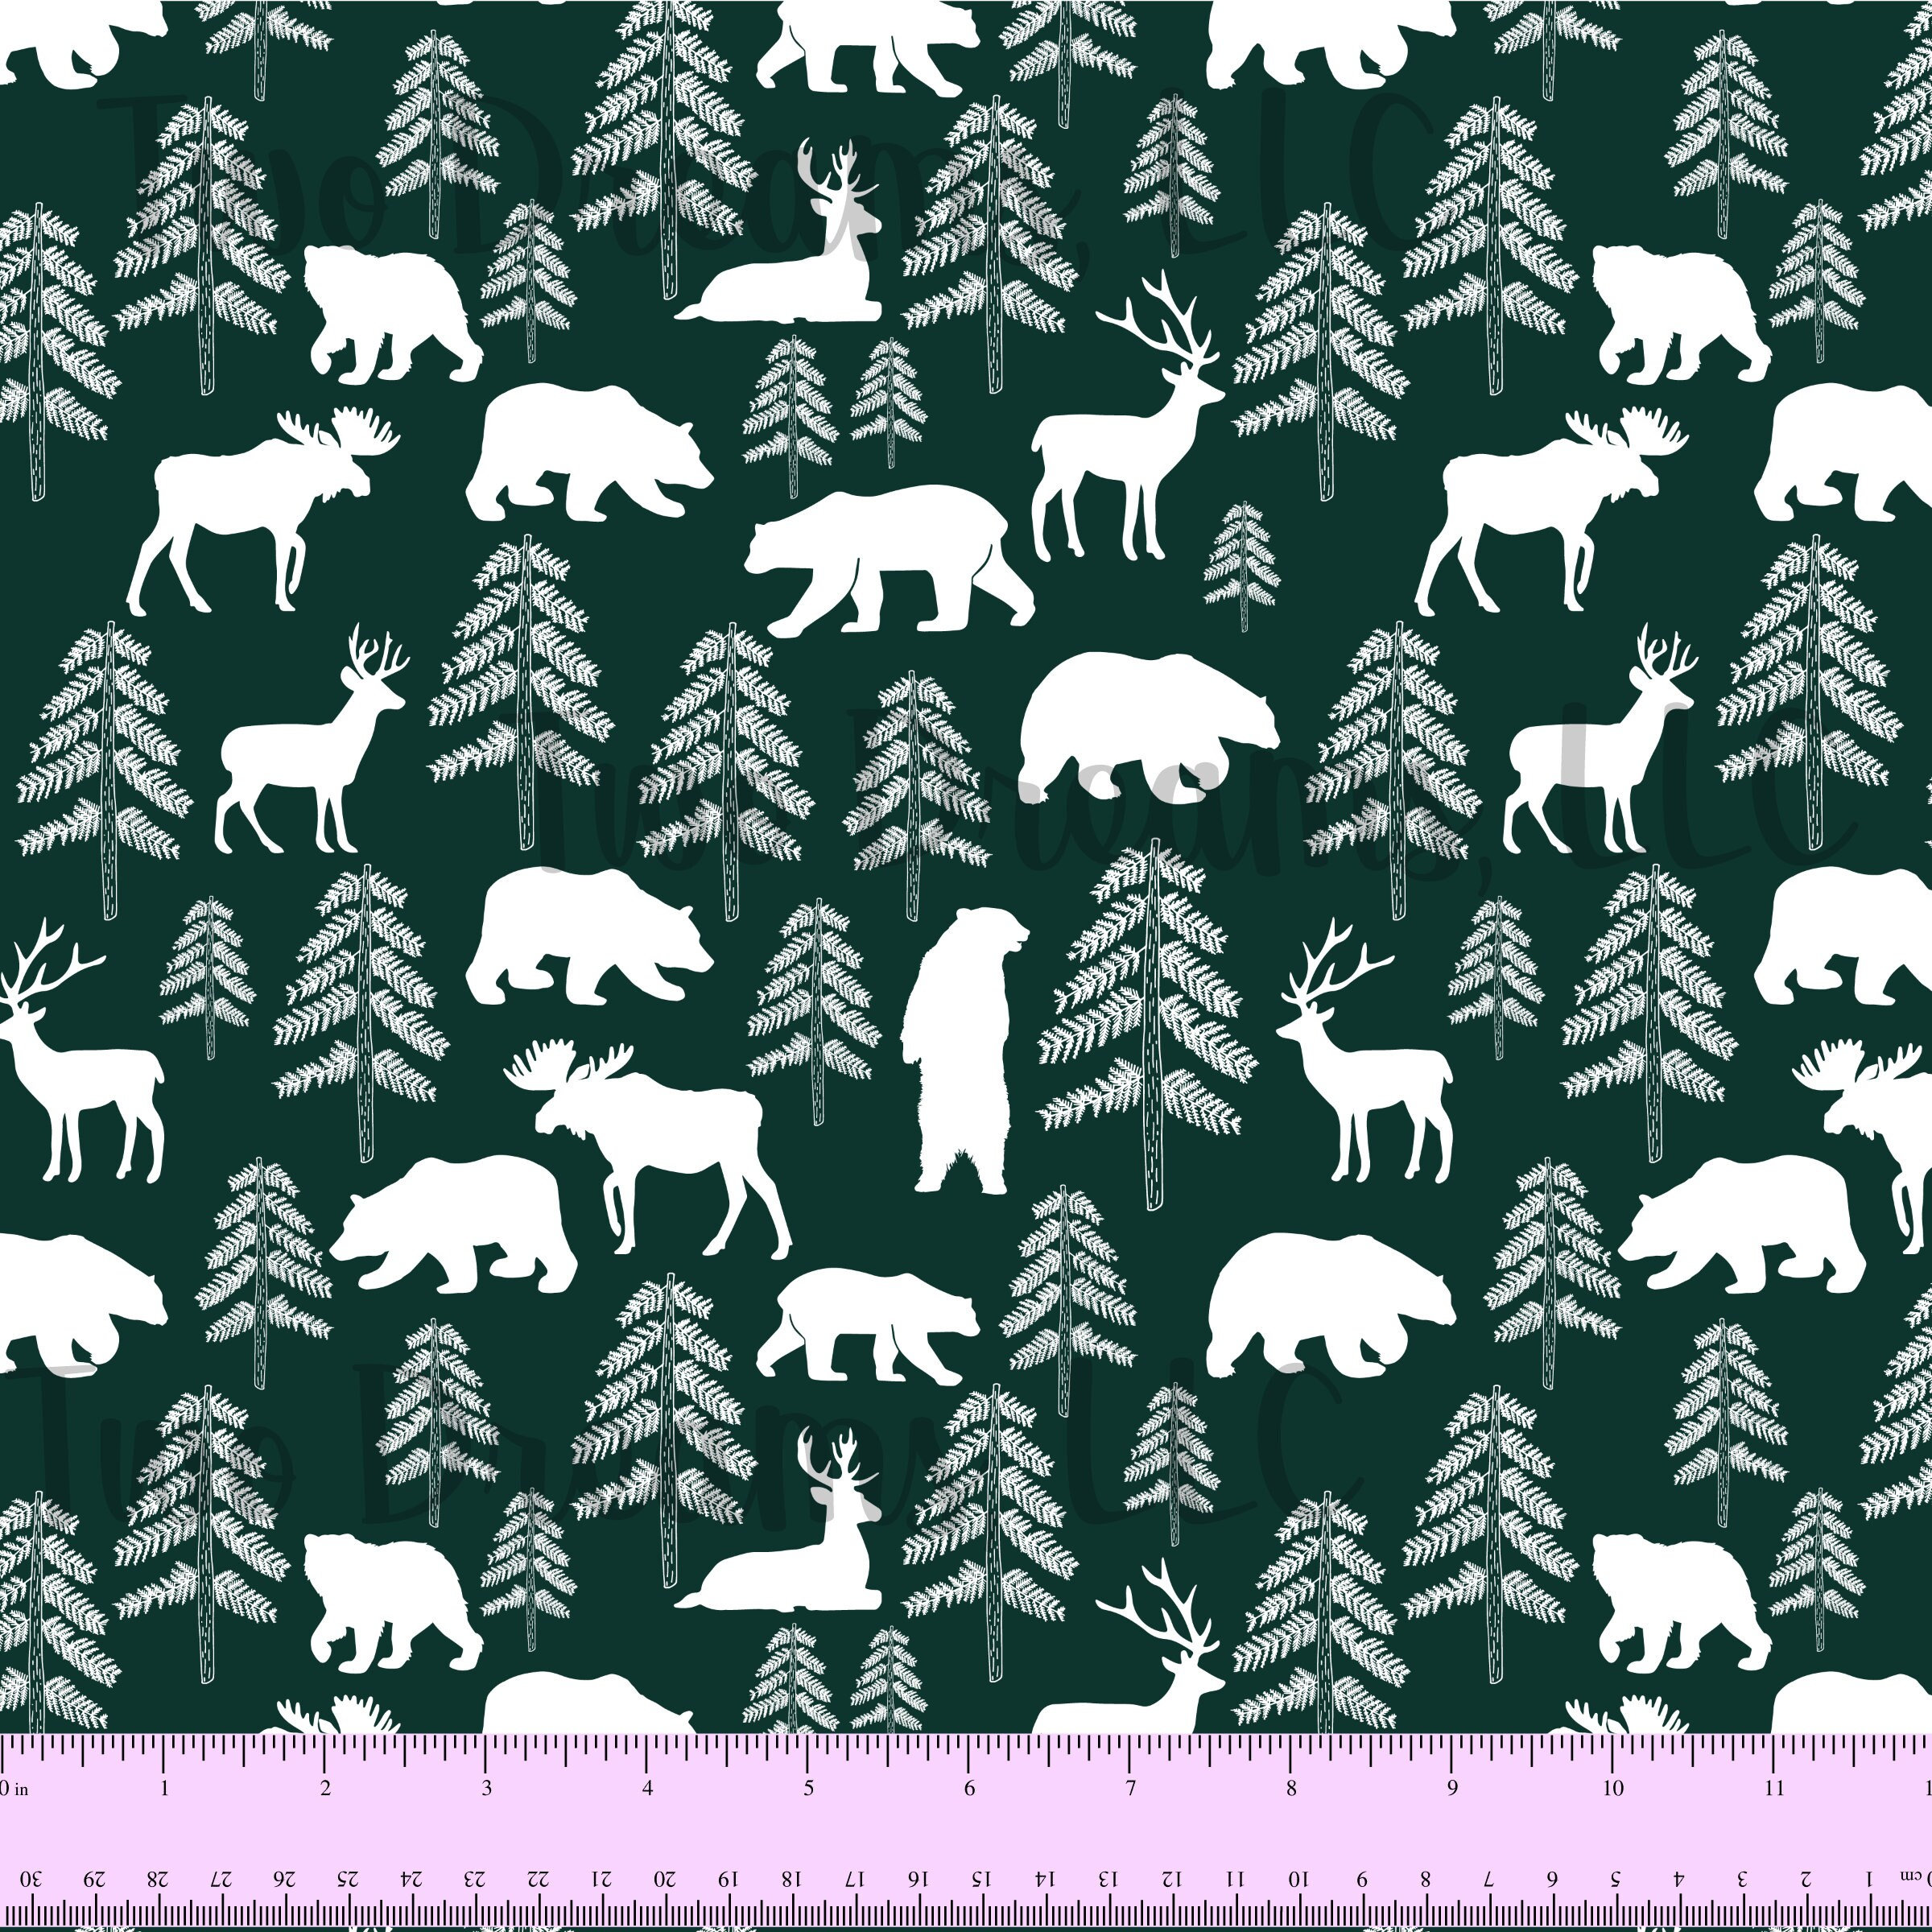 Boy Forest Green White Deer Bear Moose Trees Jersey Knit Cotton Spandex Christmas Winter Fabric Cotton CPSIA Certified Boyish